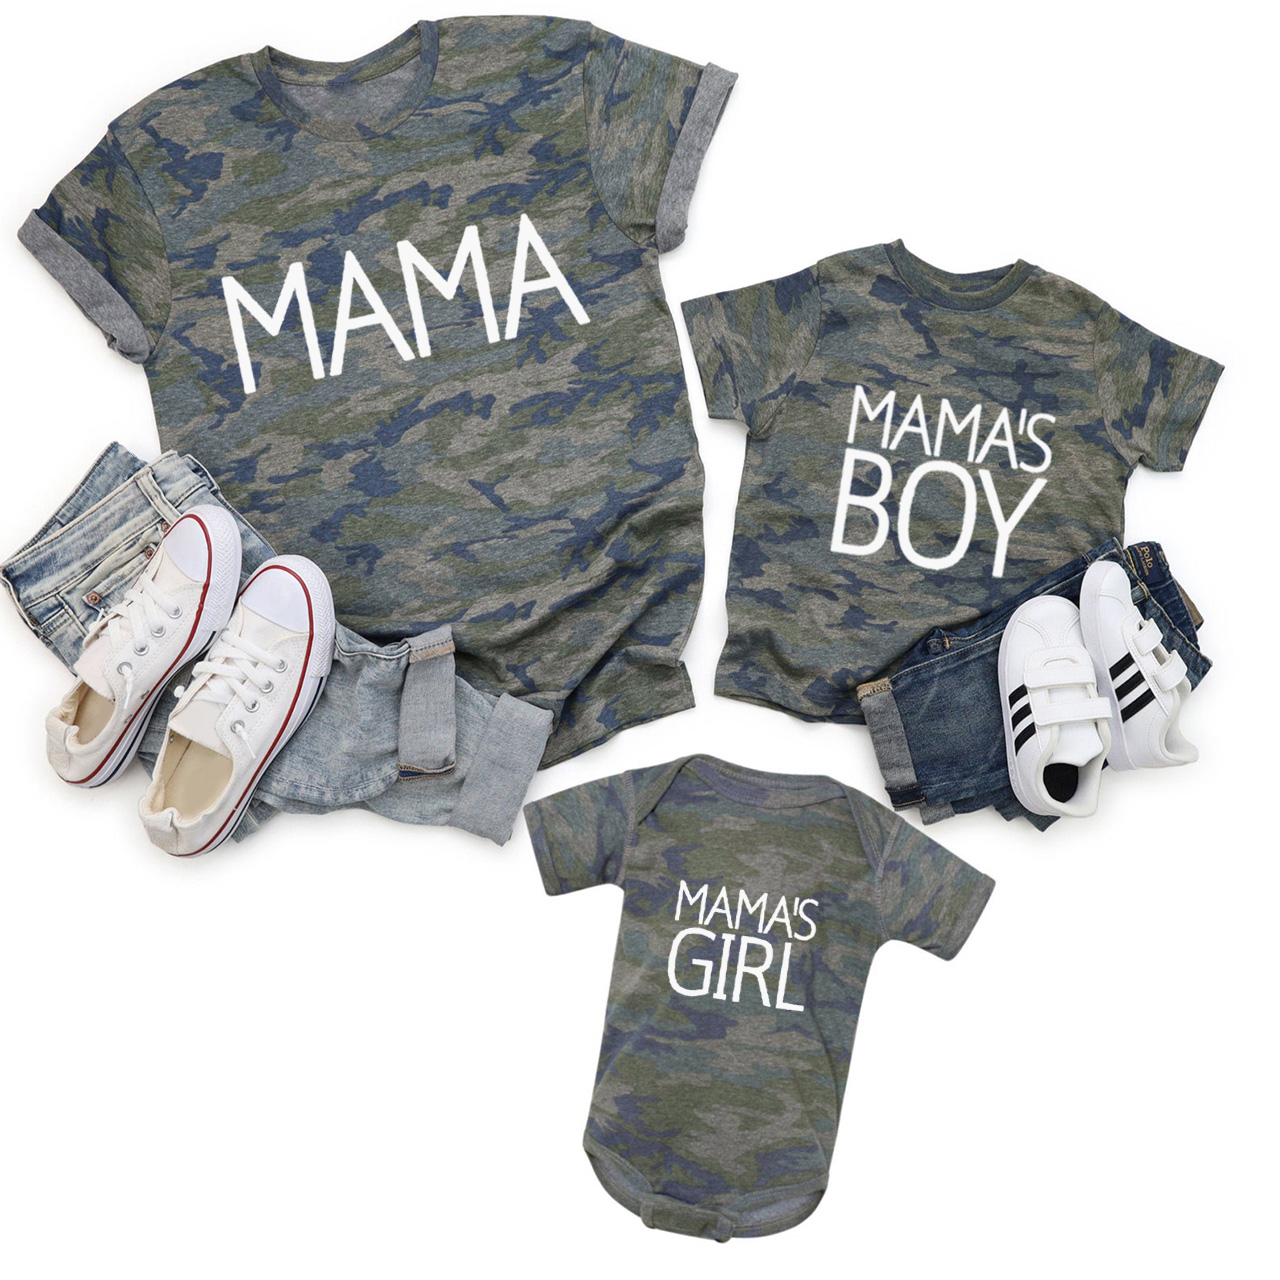 Mama or Mama's Boy & Girl Mother's Day Gift Matching T-Shirt